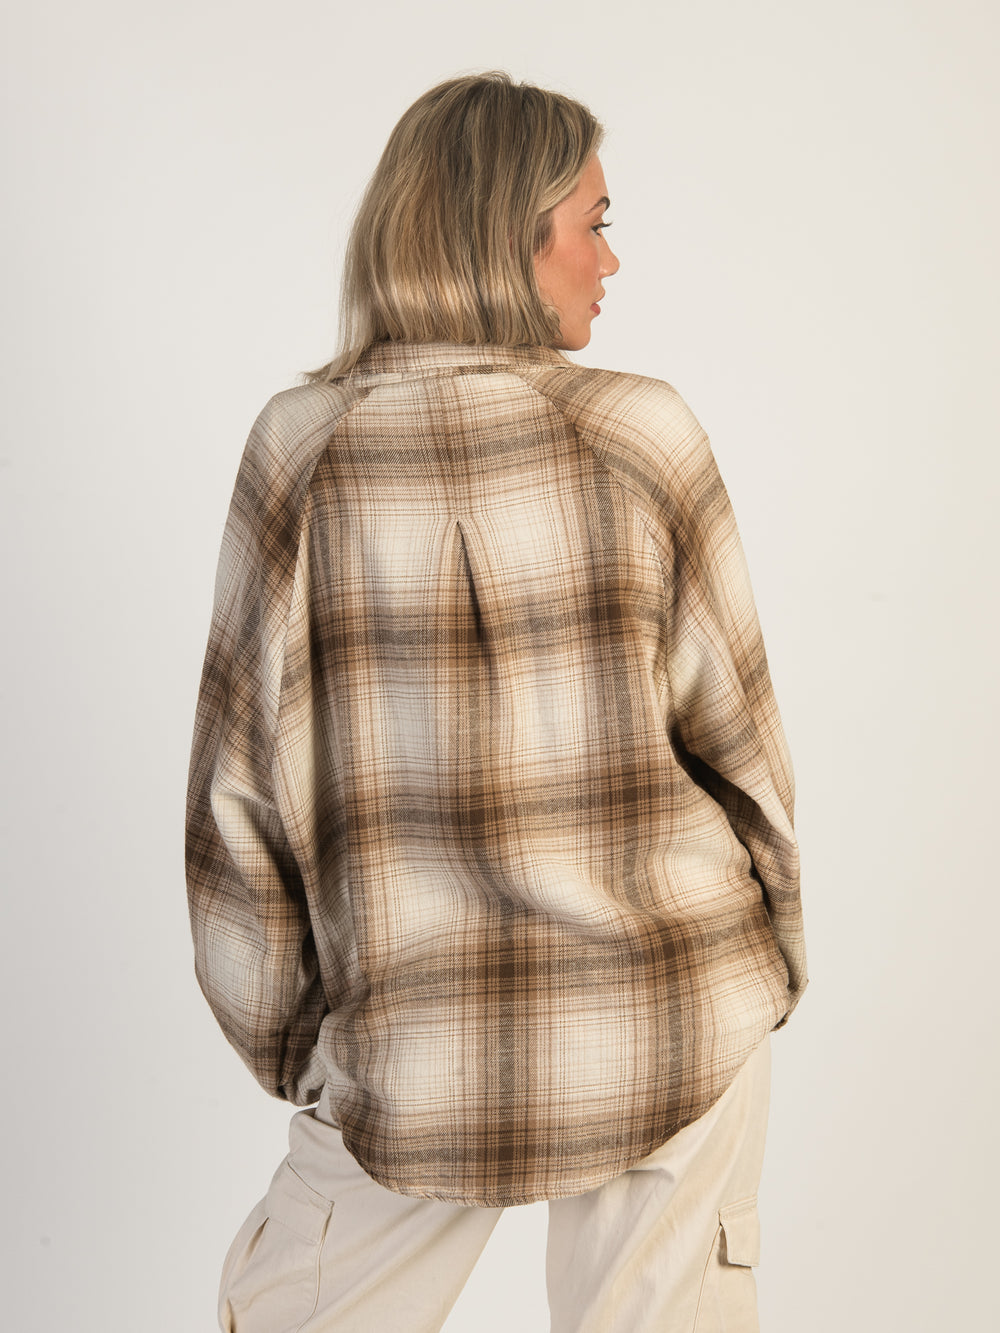 HARLOW KENDALL OVERSIZED FLANNEL